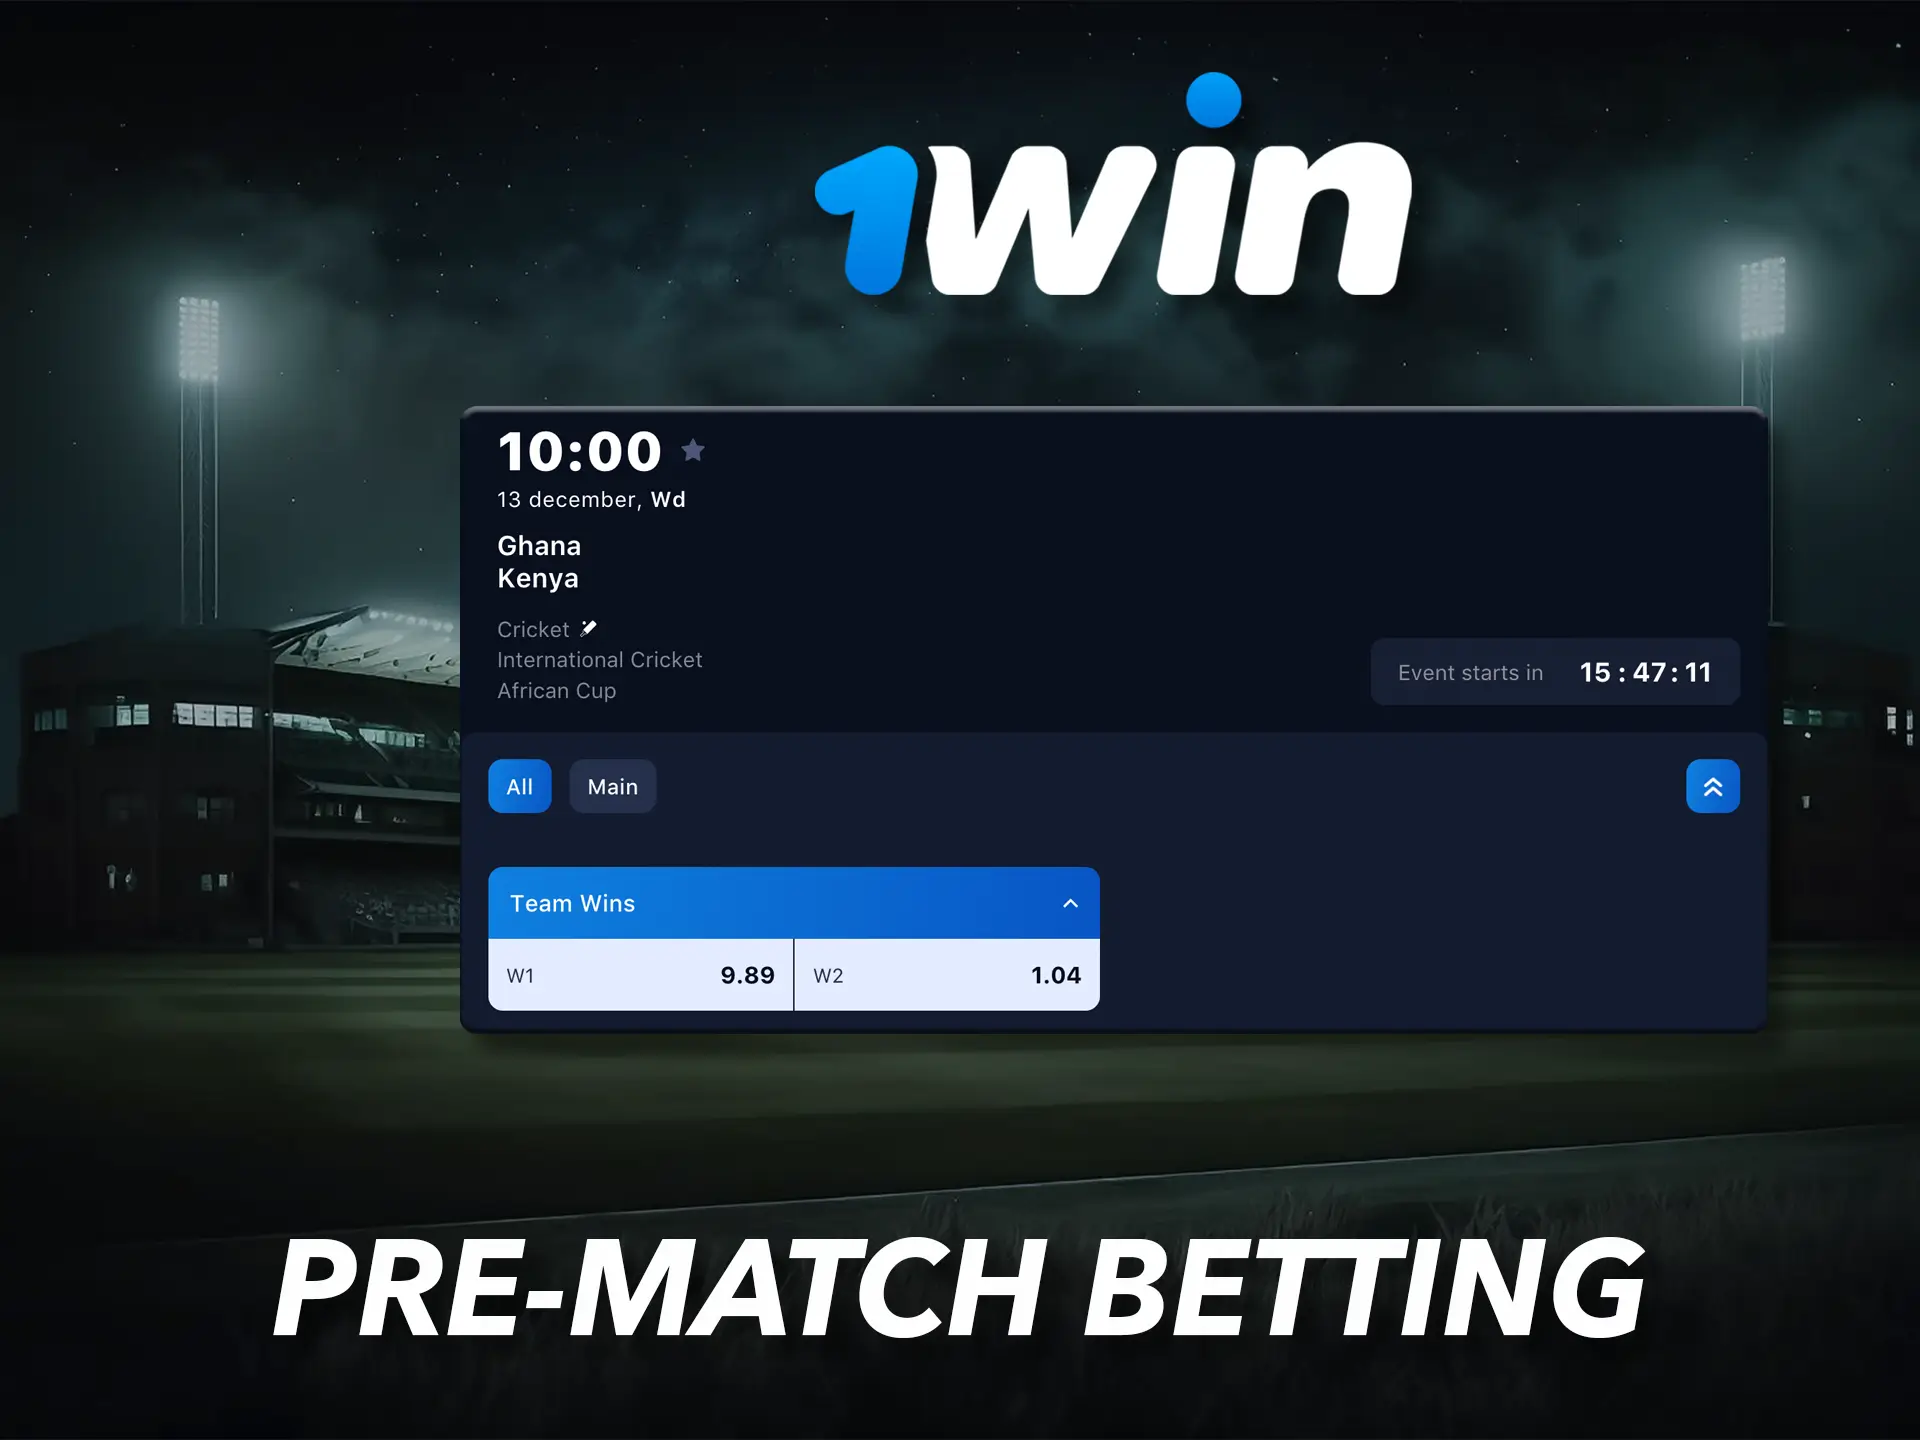 You will find the best odds from 1Win in betting on matches that have not started yet.